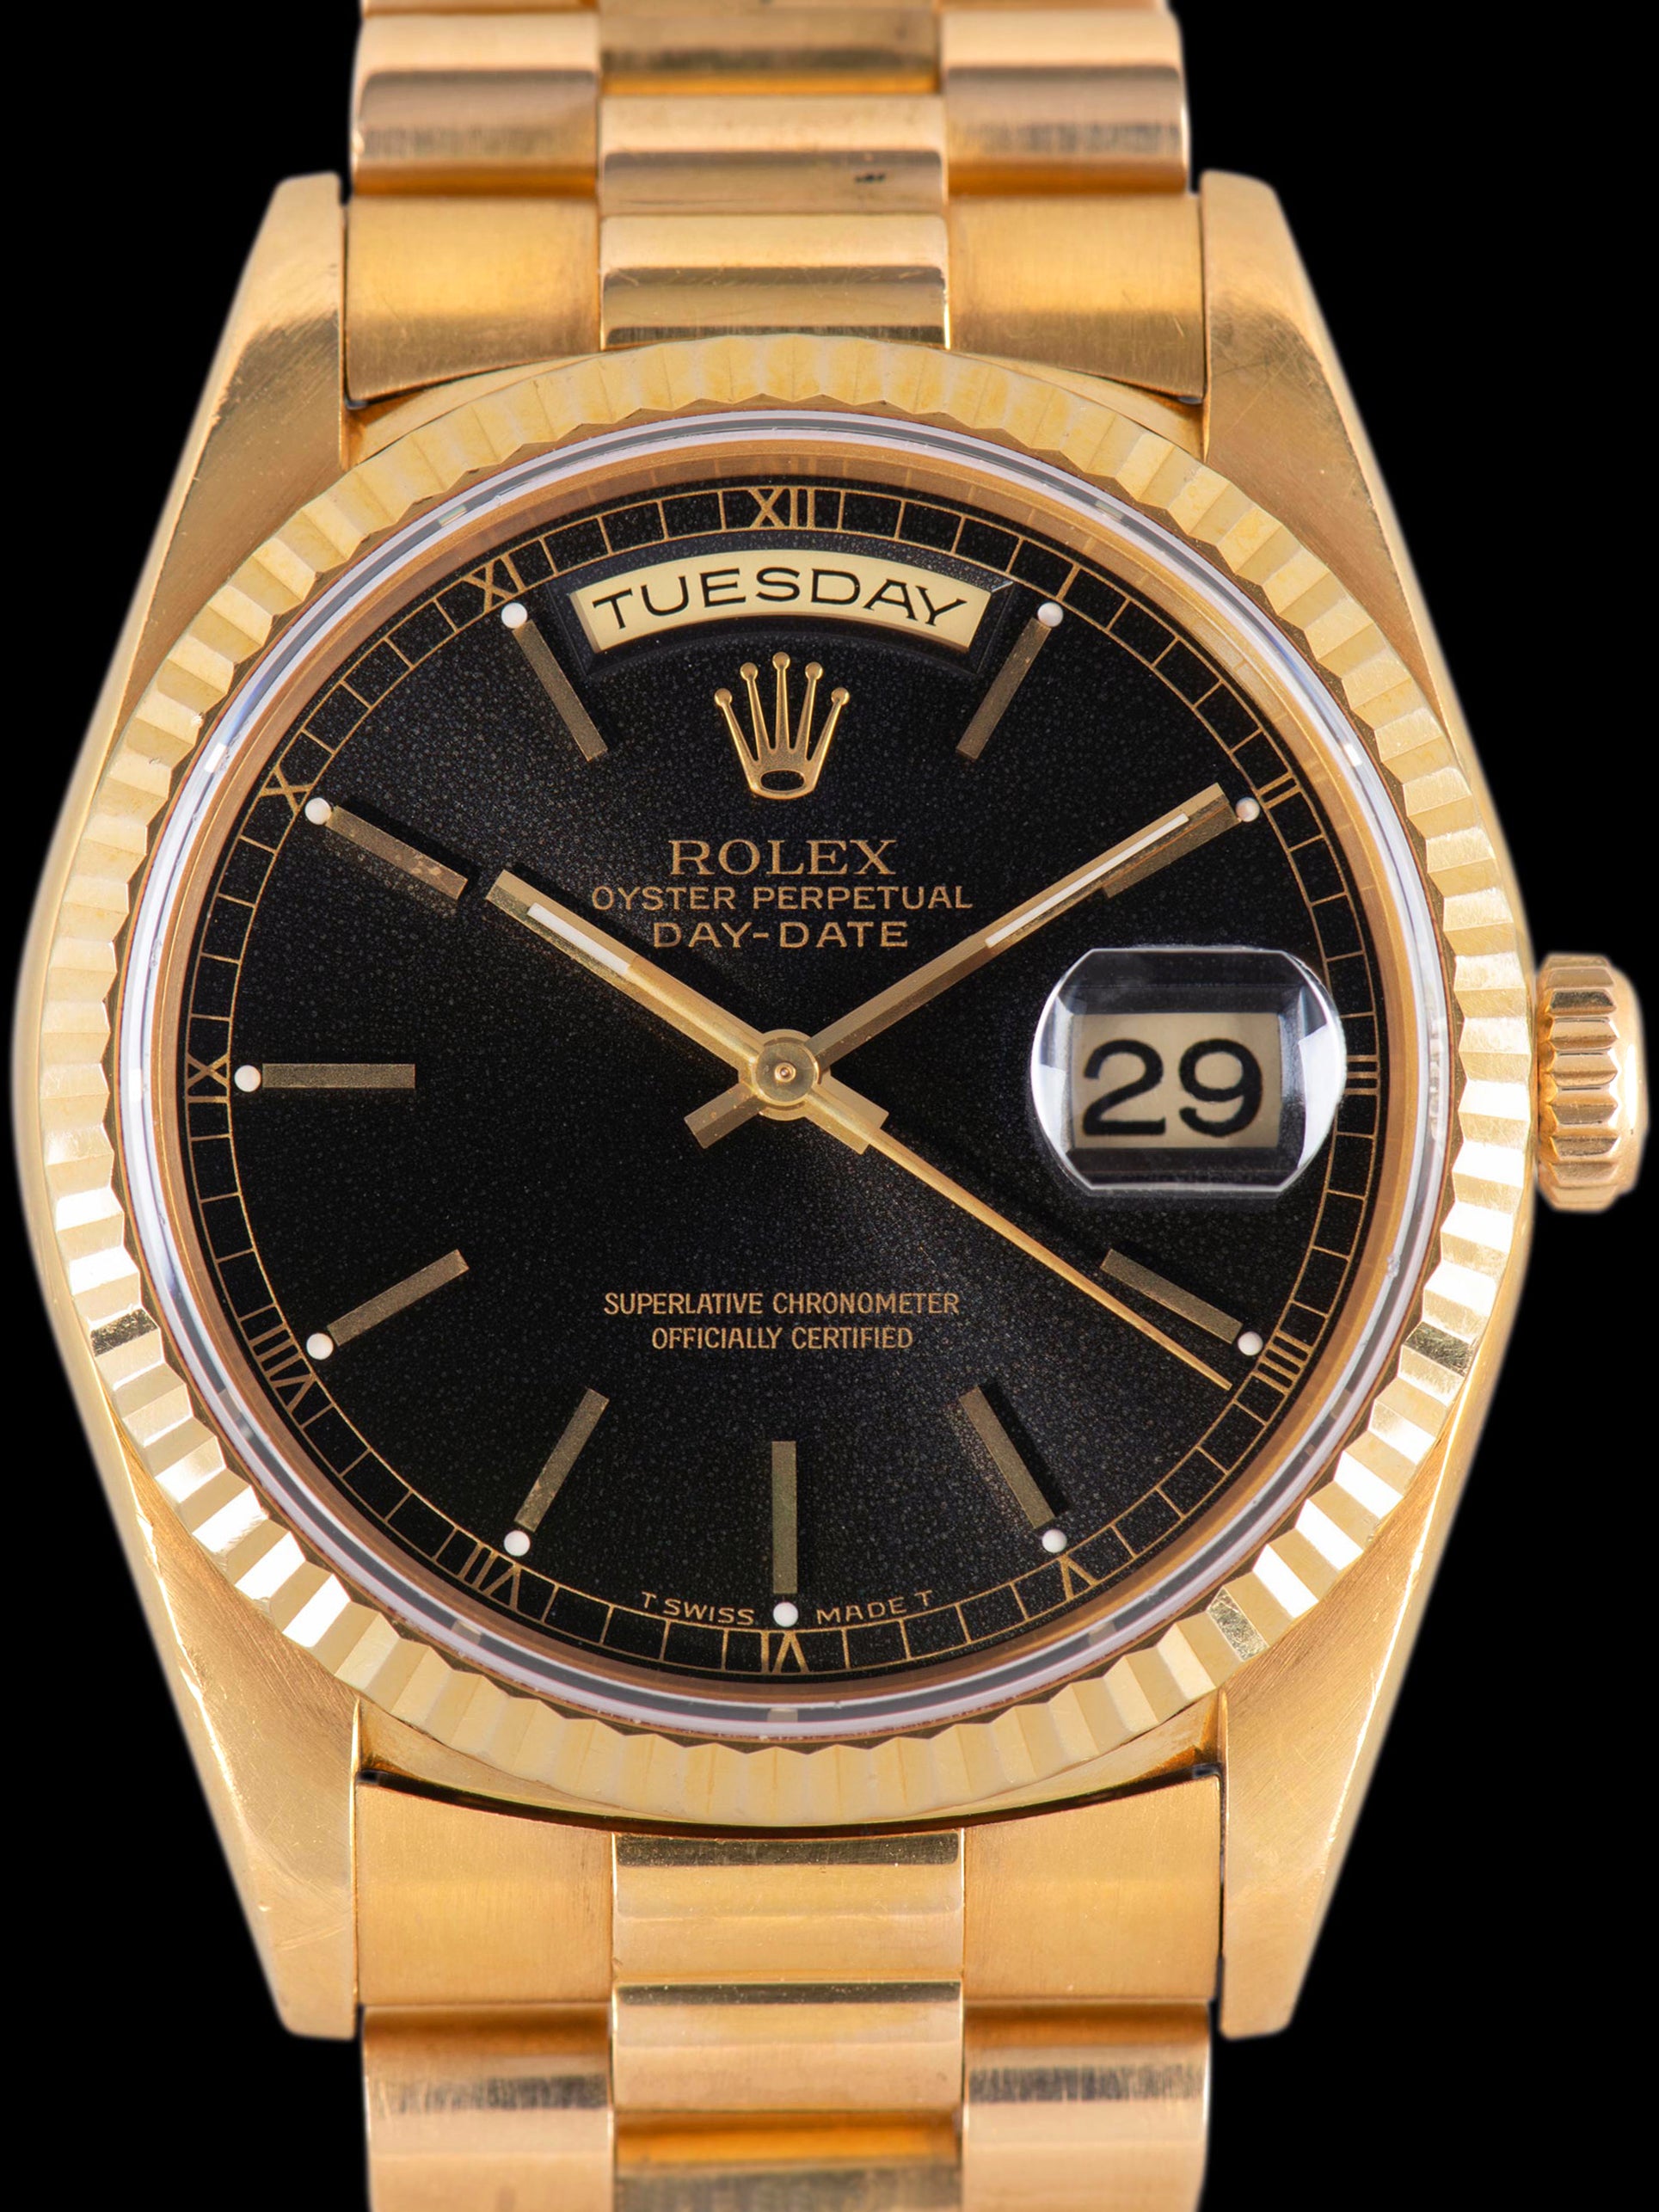 "Tropical" 1996 Rolex Day-Date 18K YG (Ref. 18238) Black Dial W/ Papers, Booklets, & Hang Tags